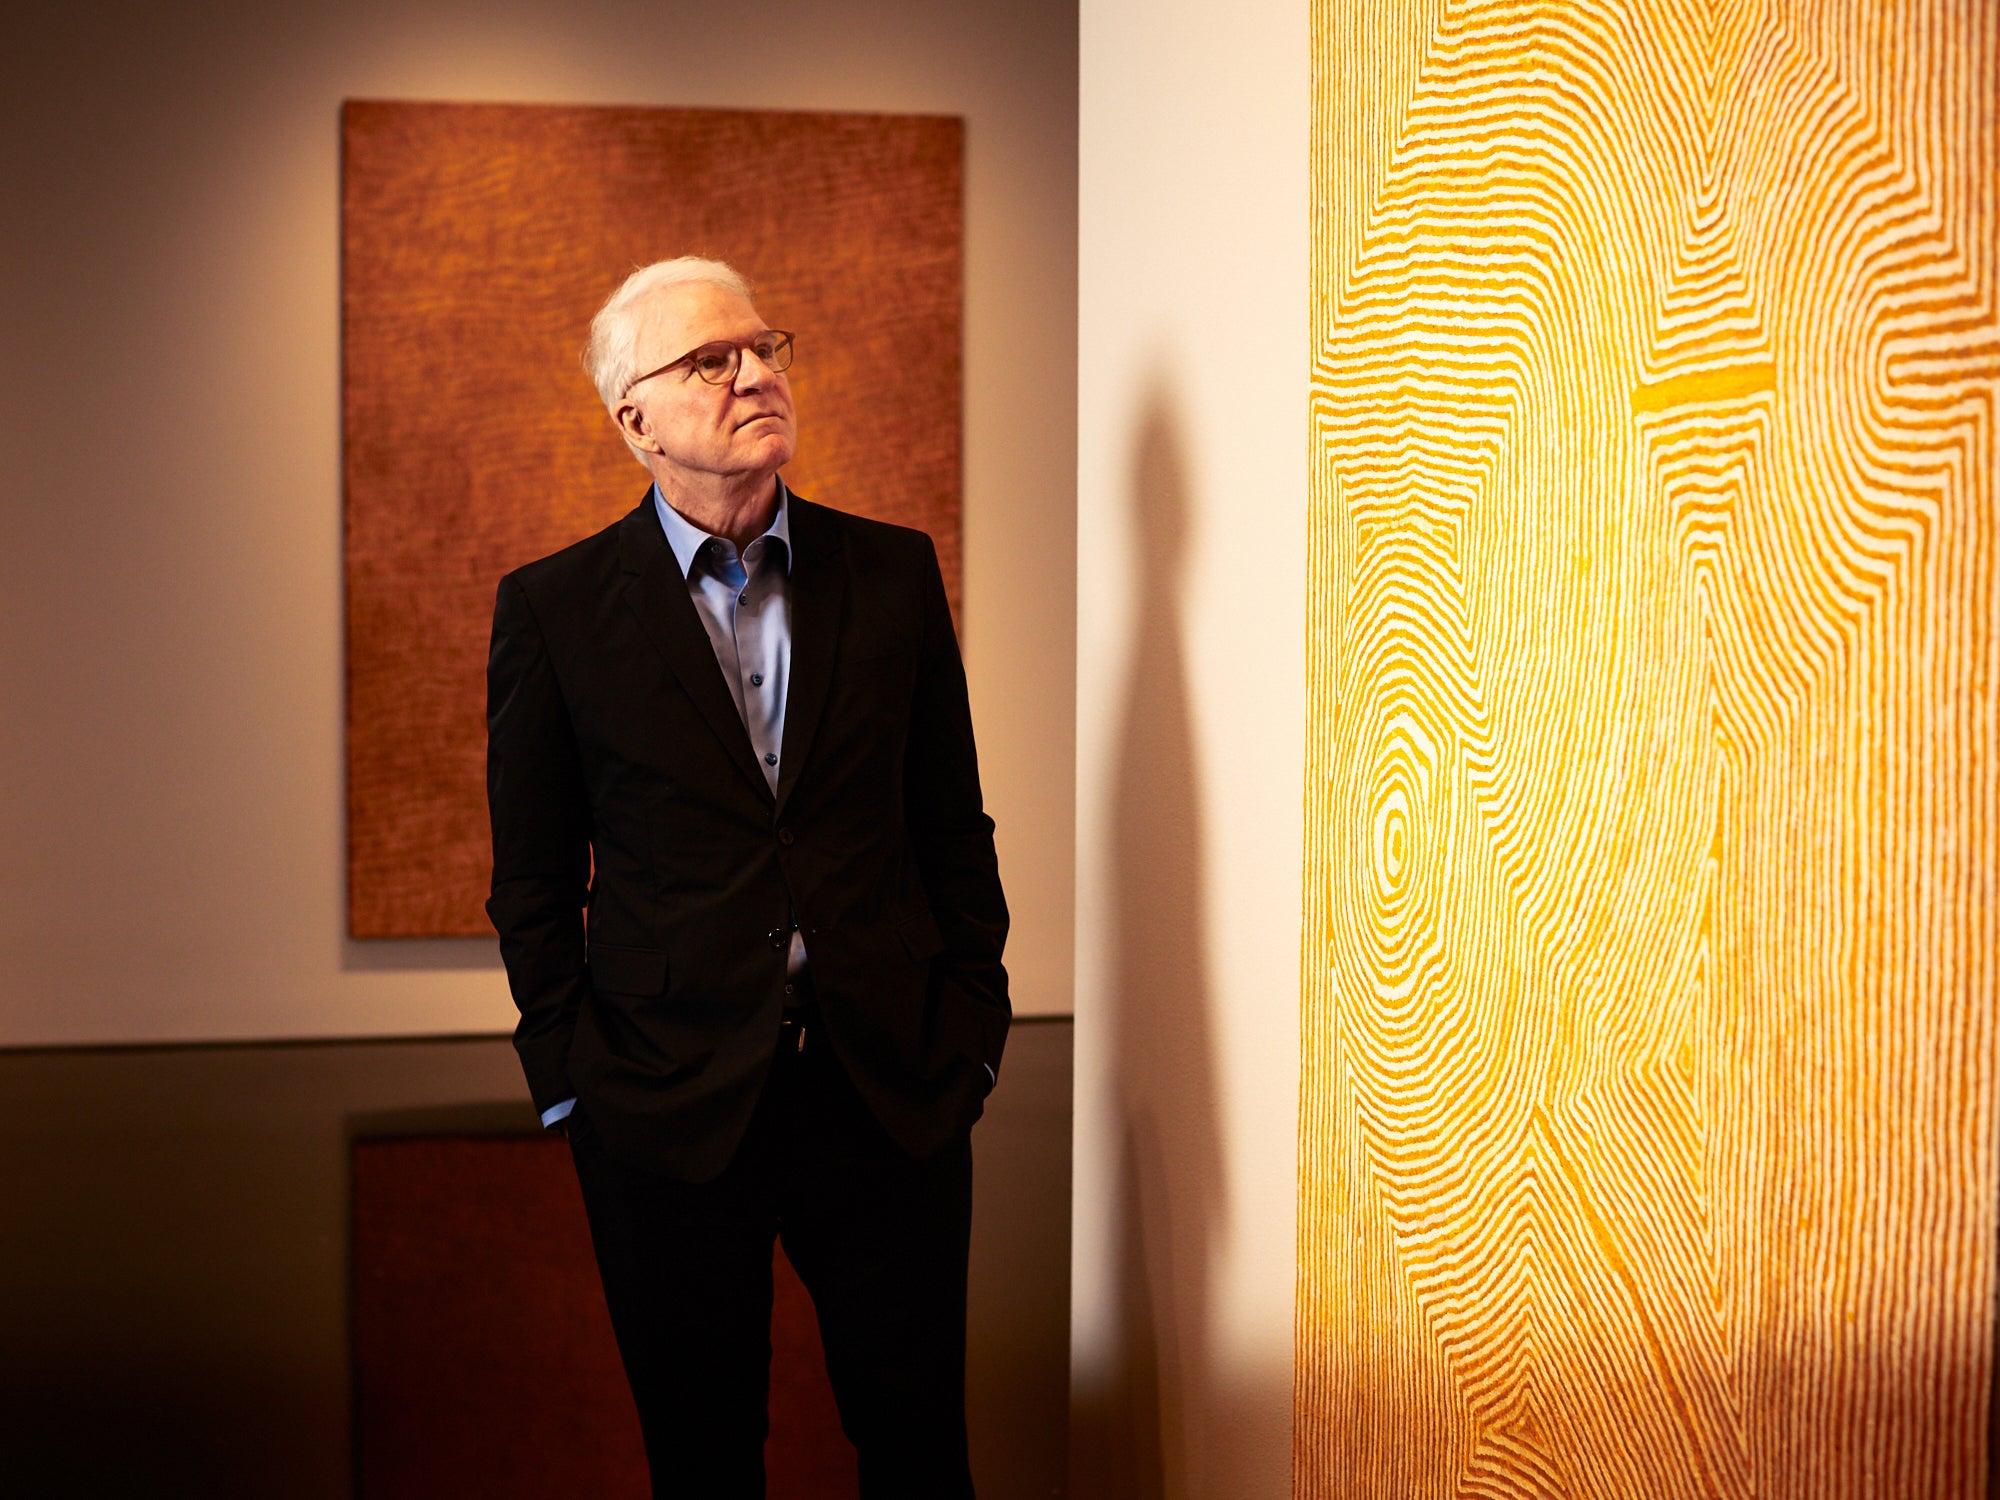 Martin, pictured at the Gagosian Gallery in New York, has found inspiration in Aboriginal art